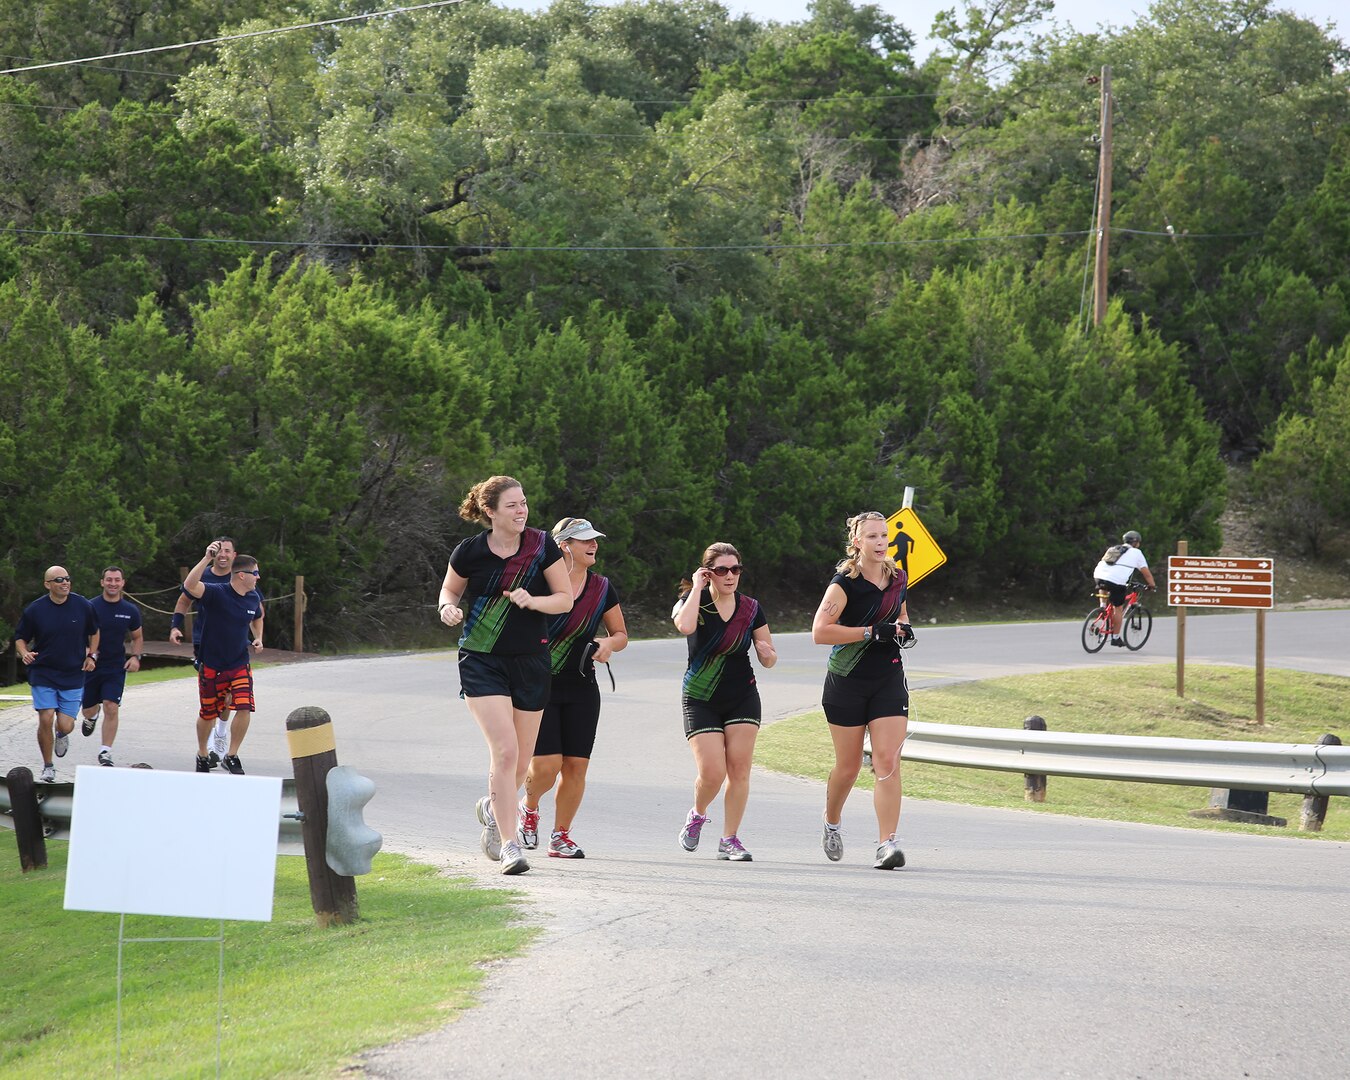 (From left to right)  Kristin Cross, Astrid Wisser, Rachel Wood and Christi Menges, members of the Sweaty Swappers team begin the 6-mile run portion of the Rambler 120 triathlon event at Canyon Lake, Texas, Oct. 20.  The team captured the Silver – All Female Relay category in the competition with a time of 3:50:46 (U.S. Air Force photo by Dan J. Solis)